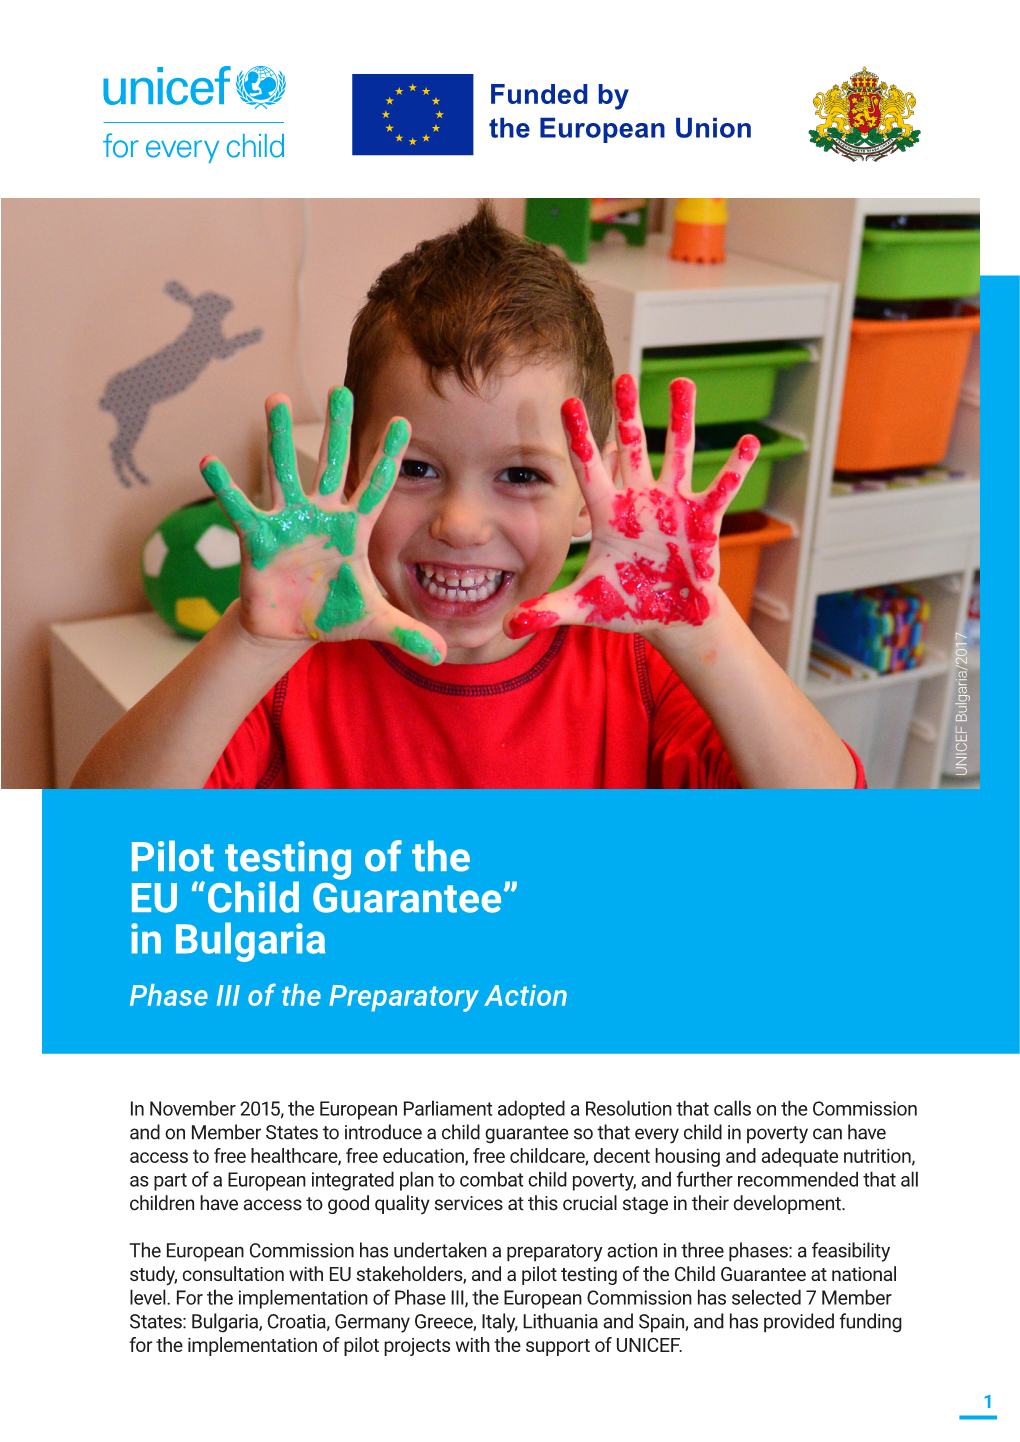 Pilot Testing of the EU “Child Guarantee” in Bulgaria Phase III of the Preparatory Action